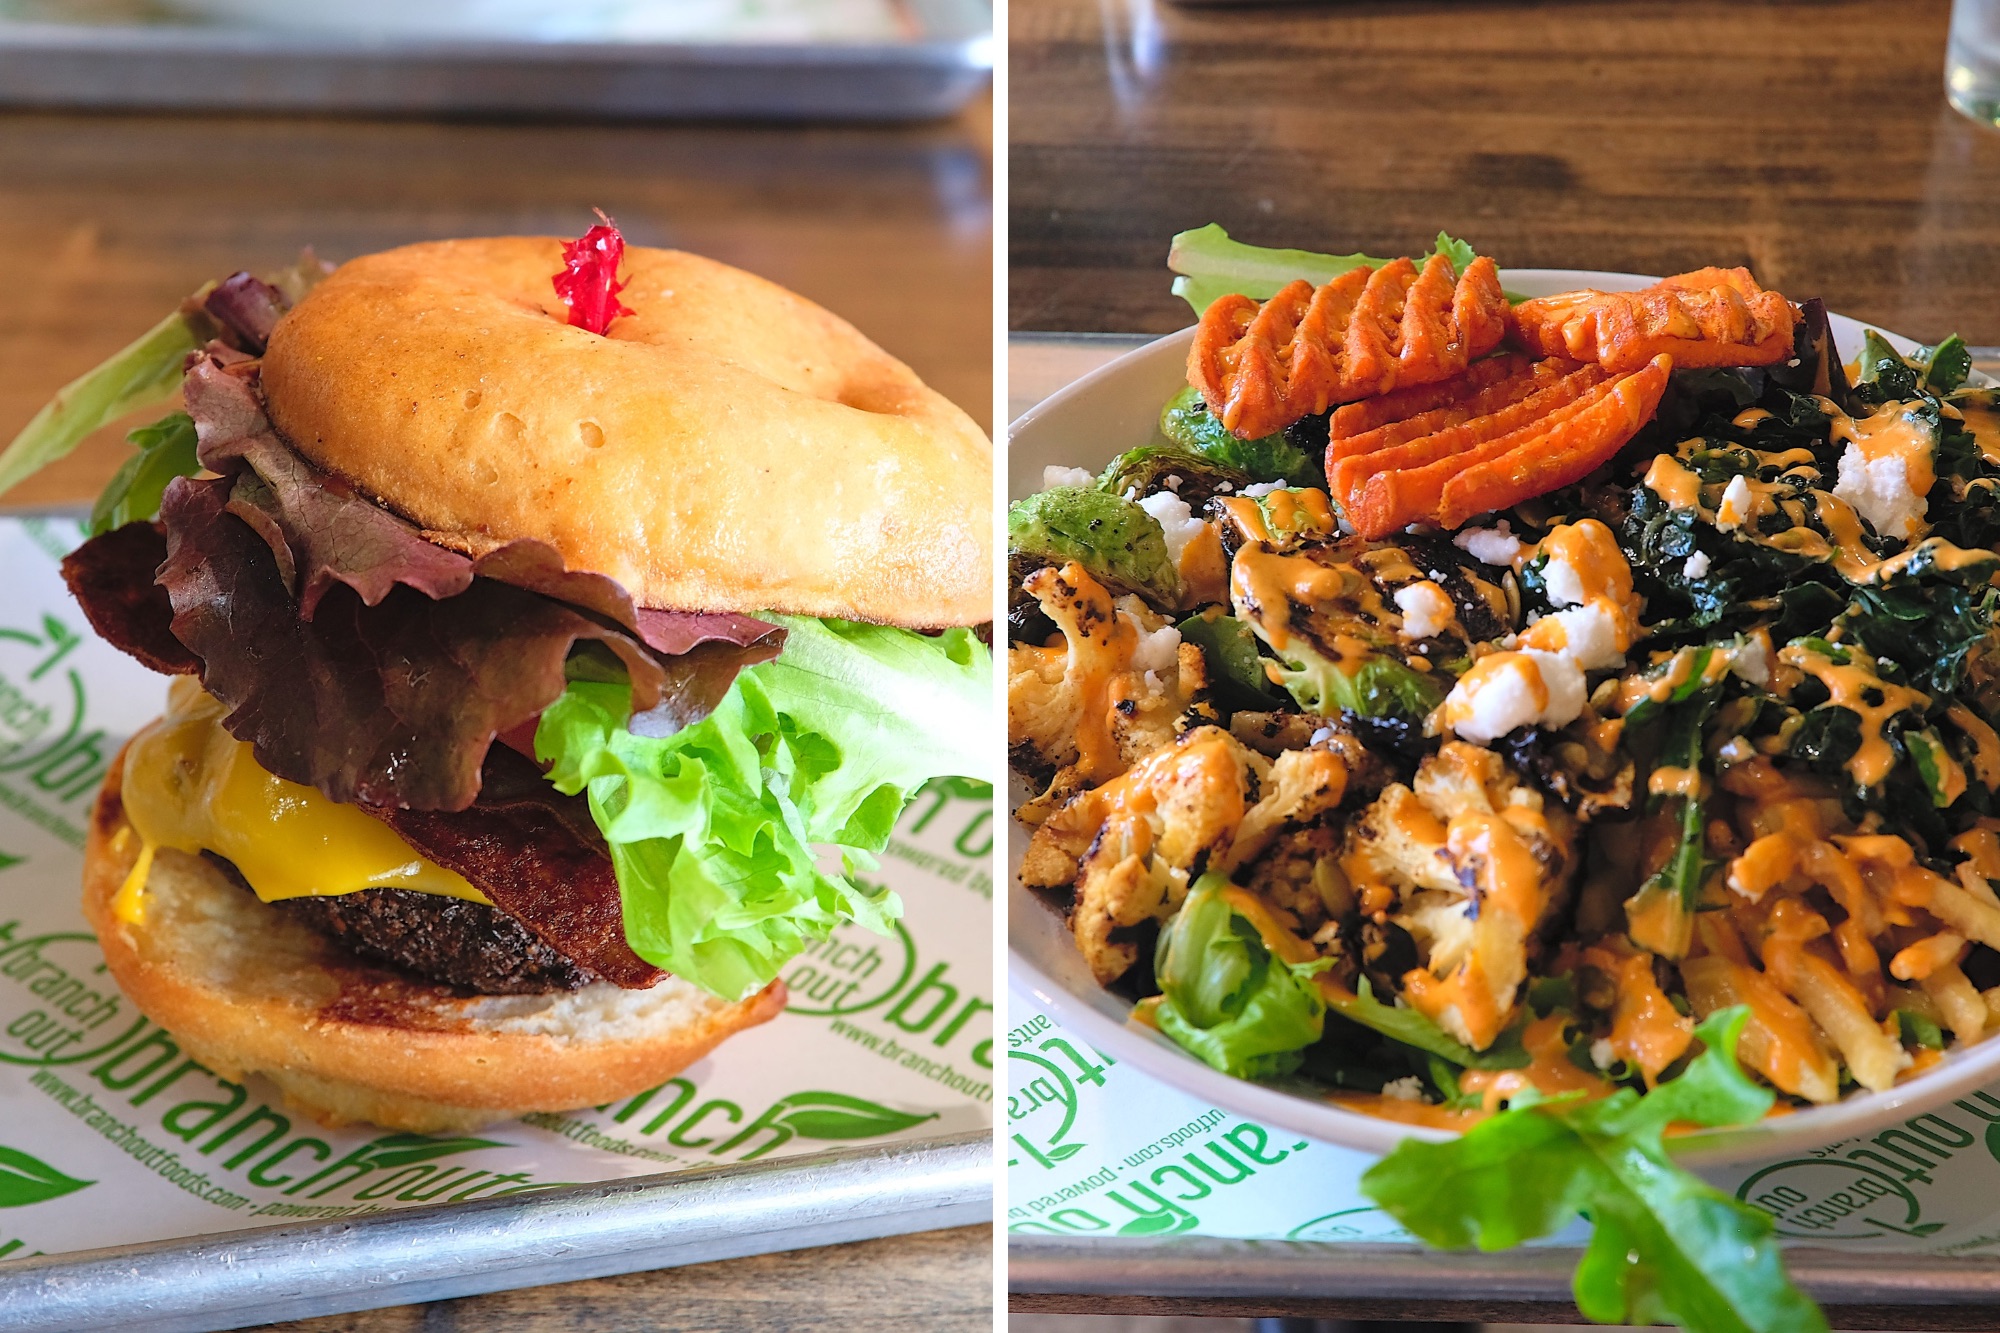 Two dishes from Branch Out: A vegan burger and a harvest bowl